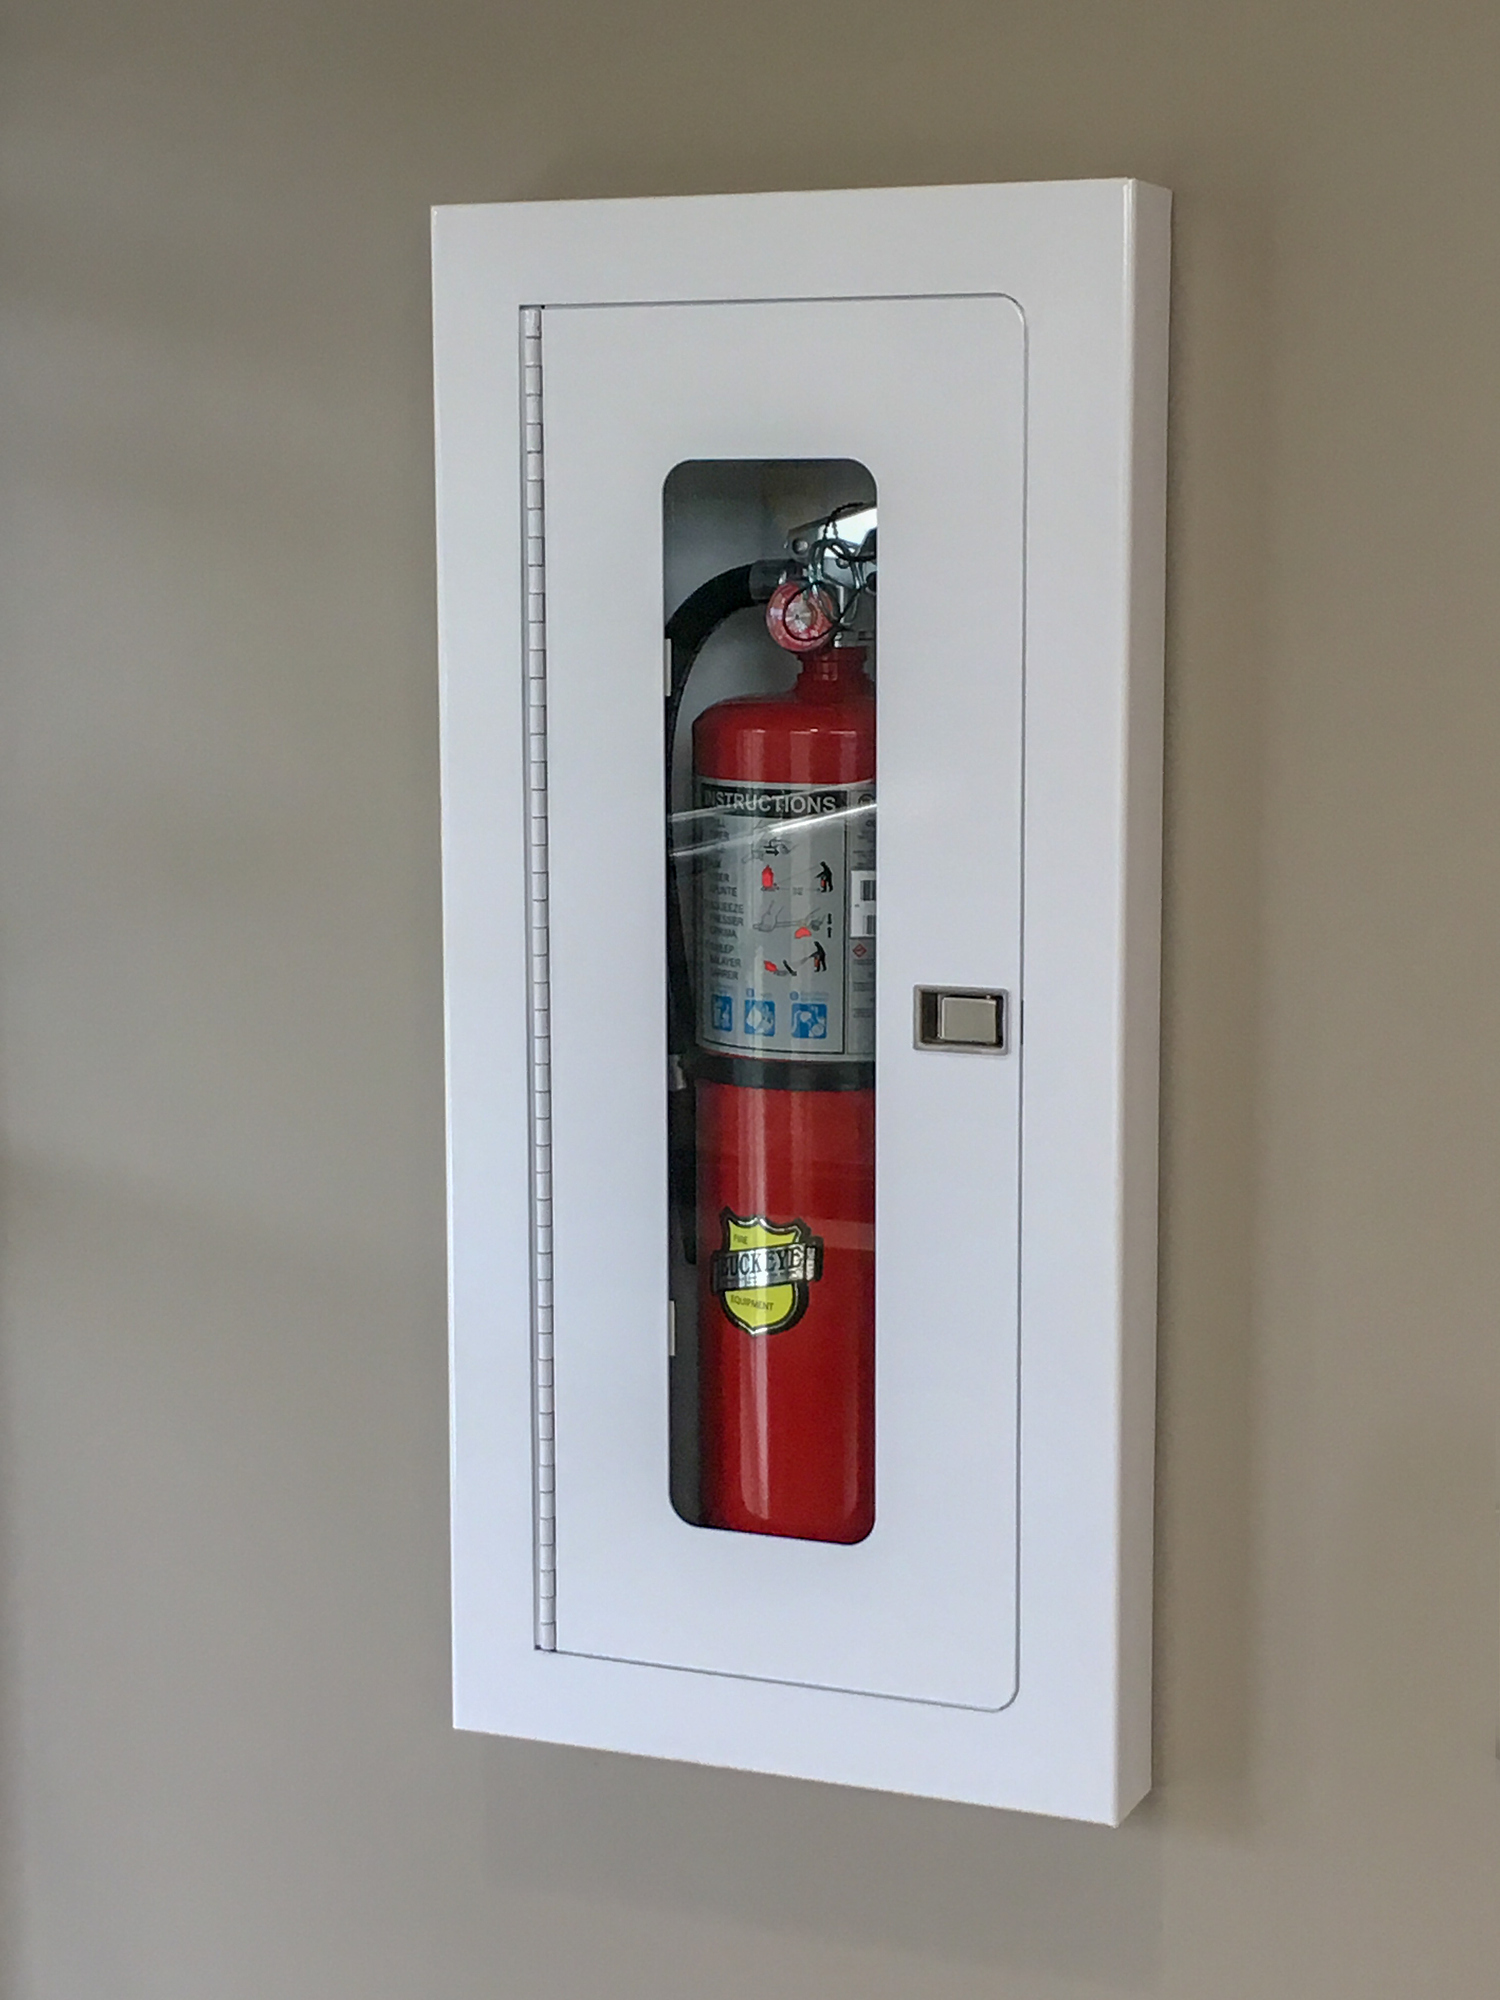 Where should fire extinguishers be located in an office?